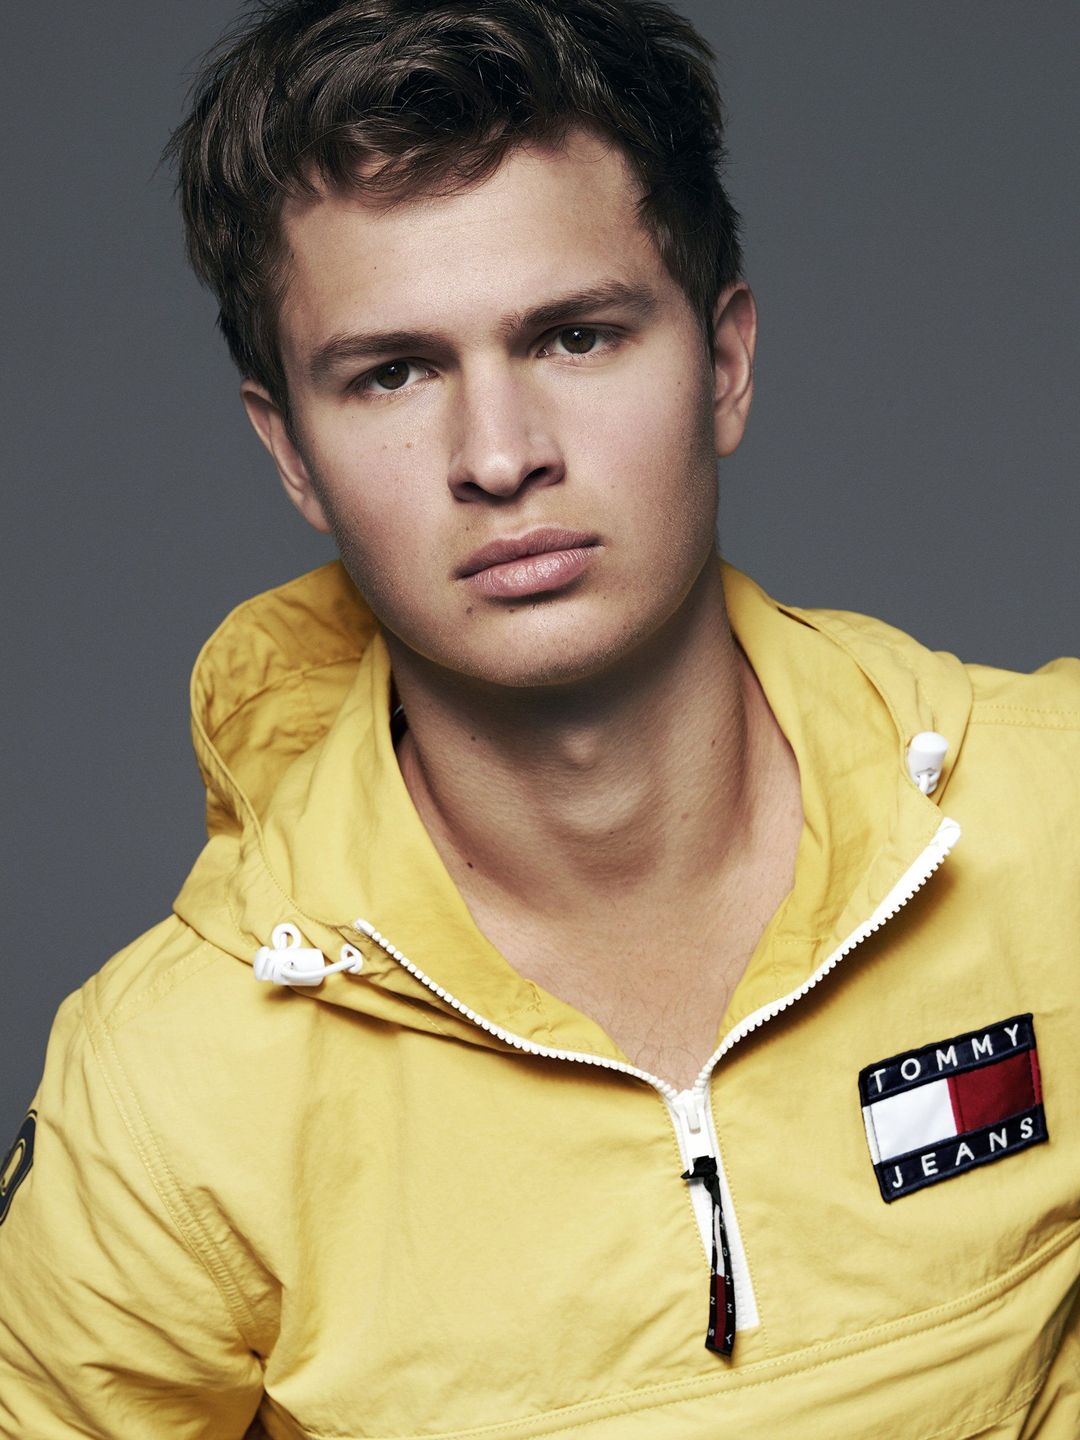 Ansel Elgort does he have kids